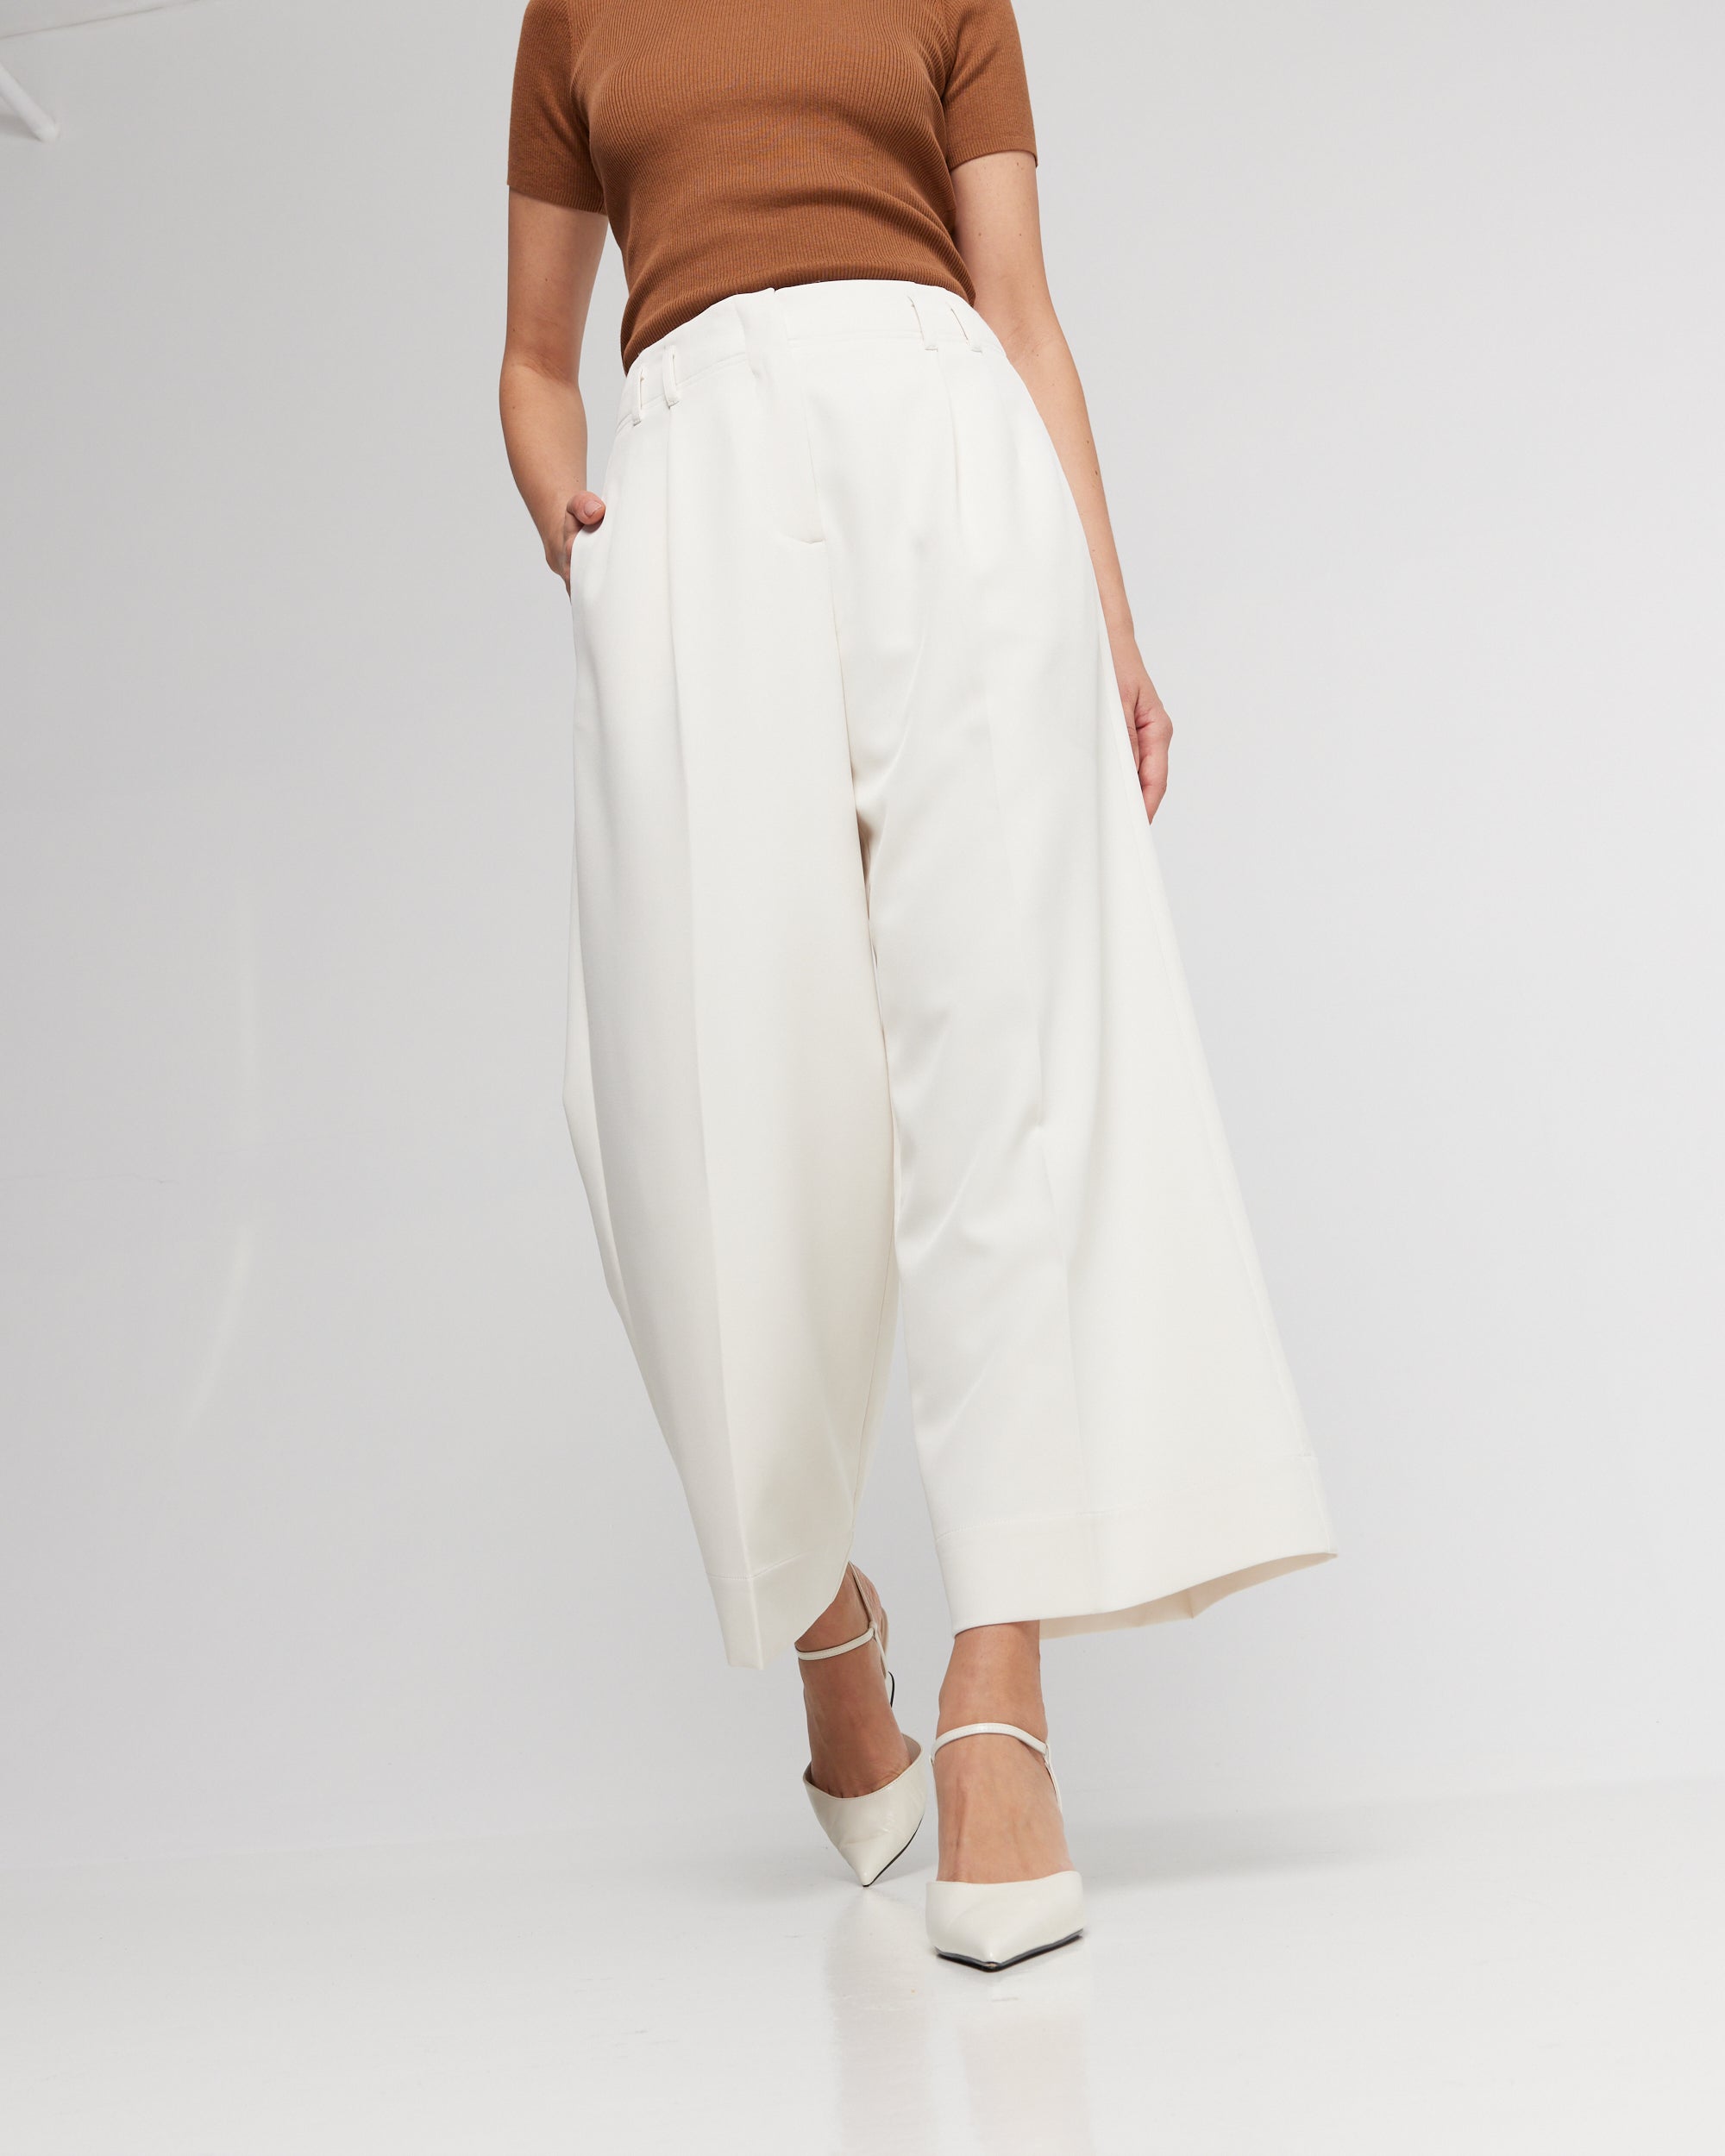 The Ace Pant in Smart Crepe